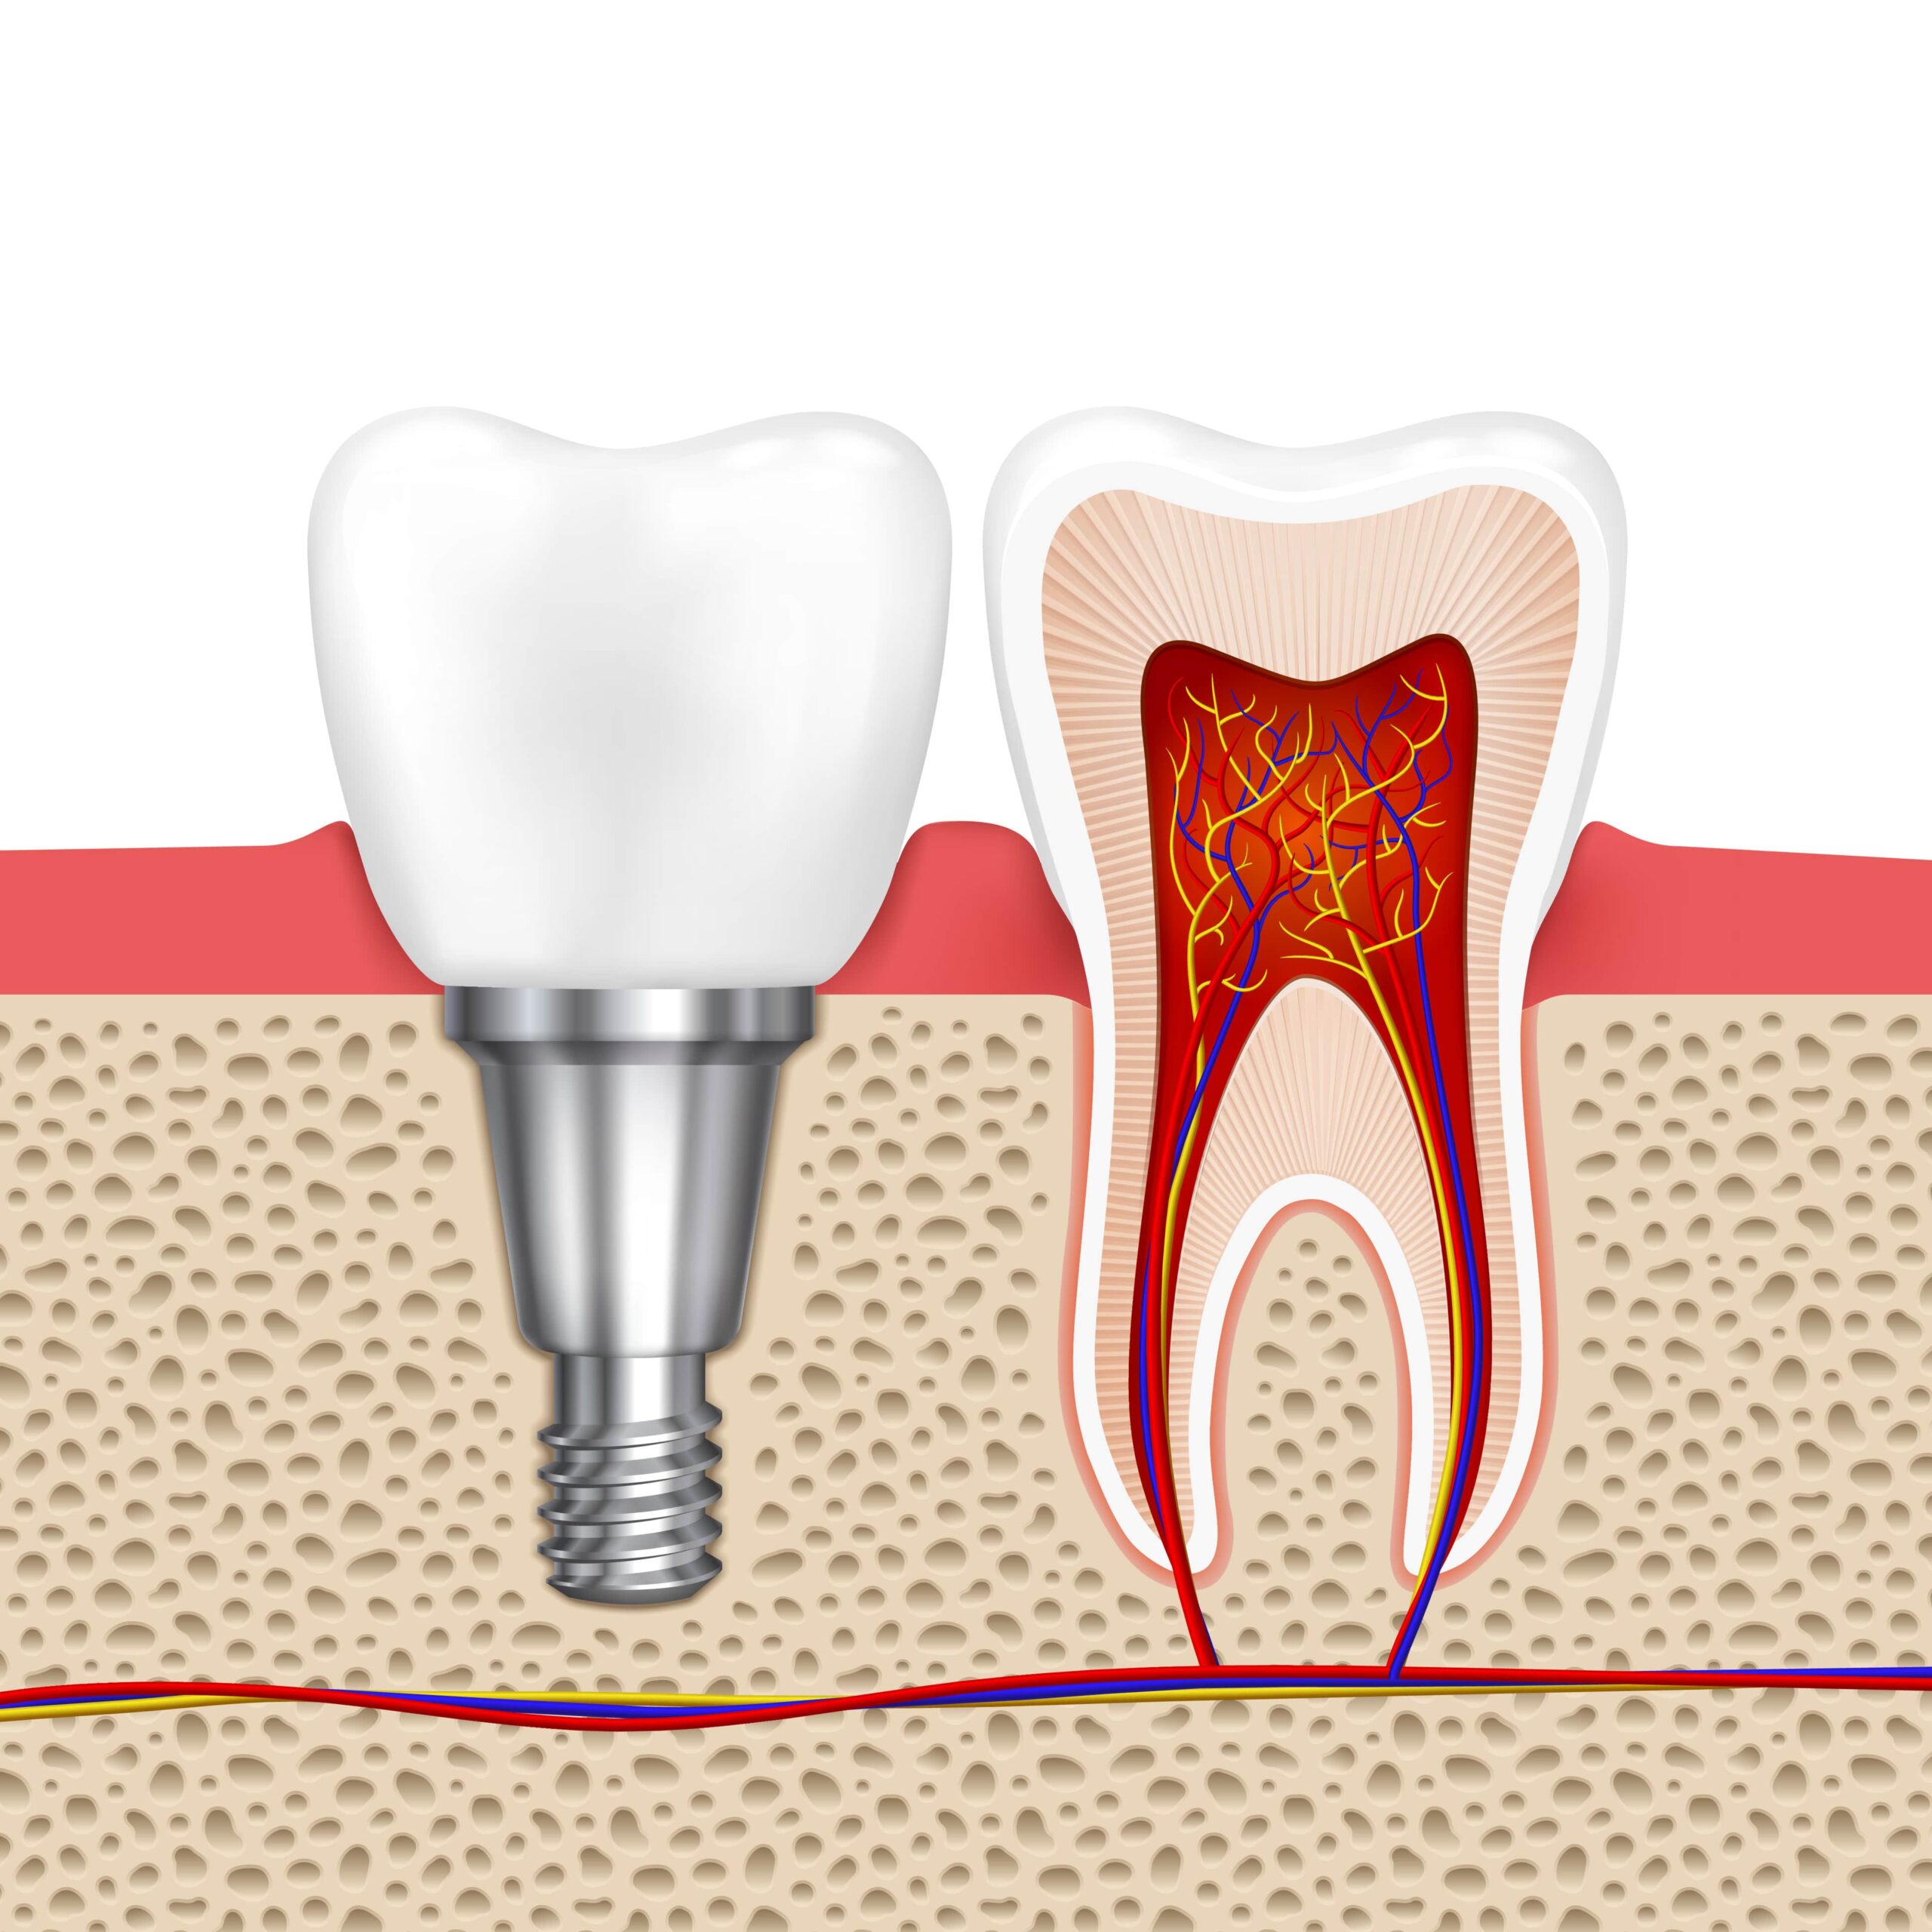 Root Canal vs. Dental Implant: Which One Is Right for Me?